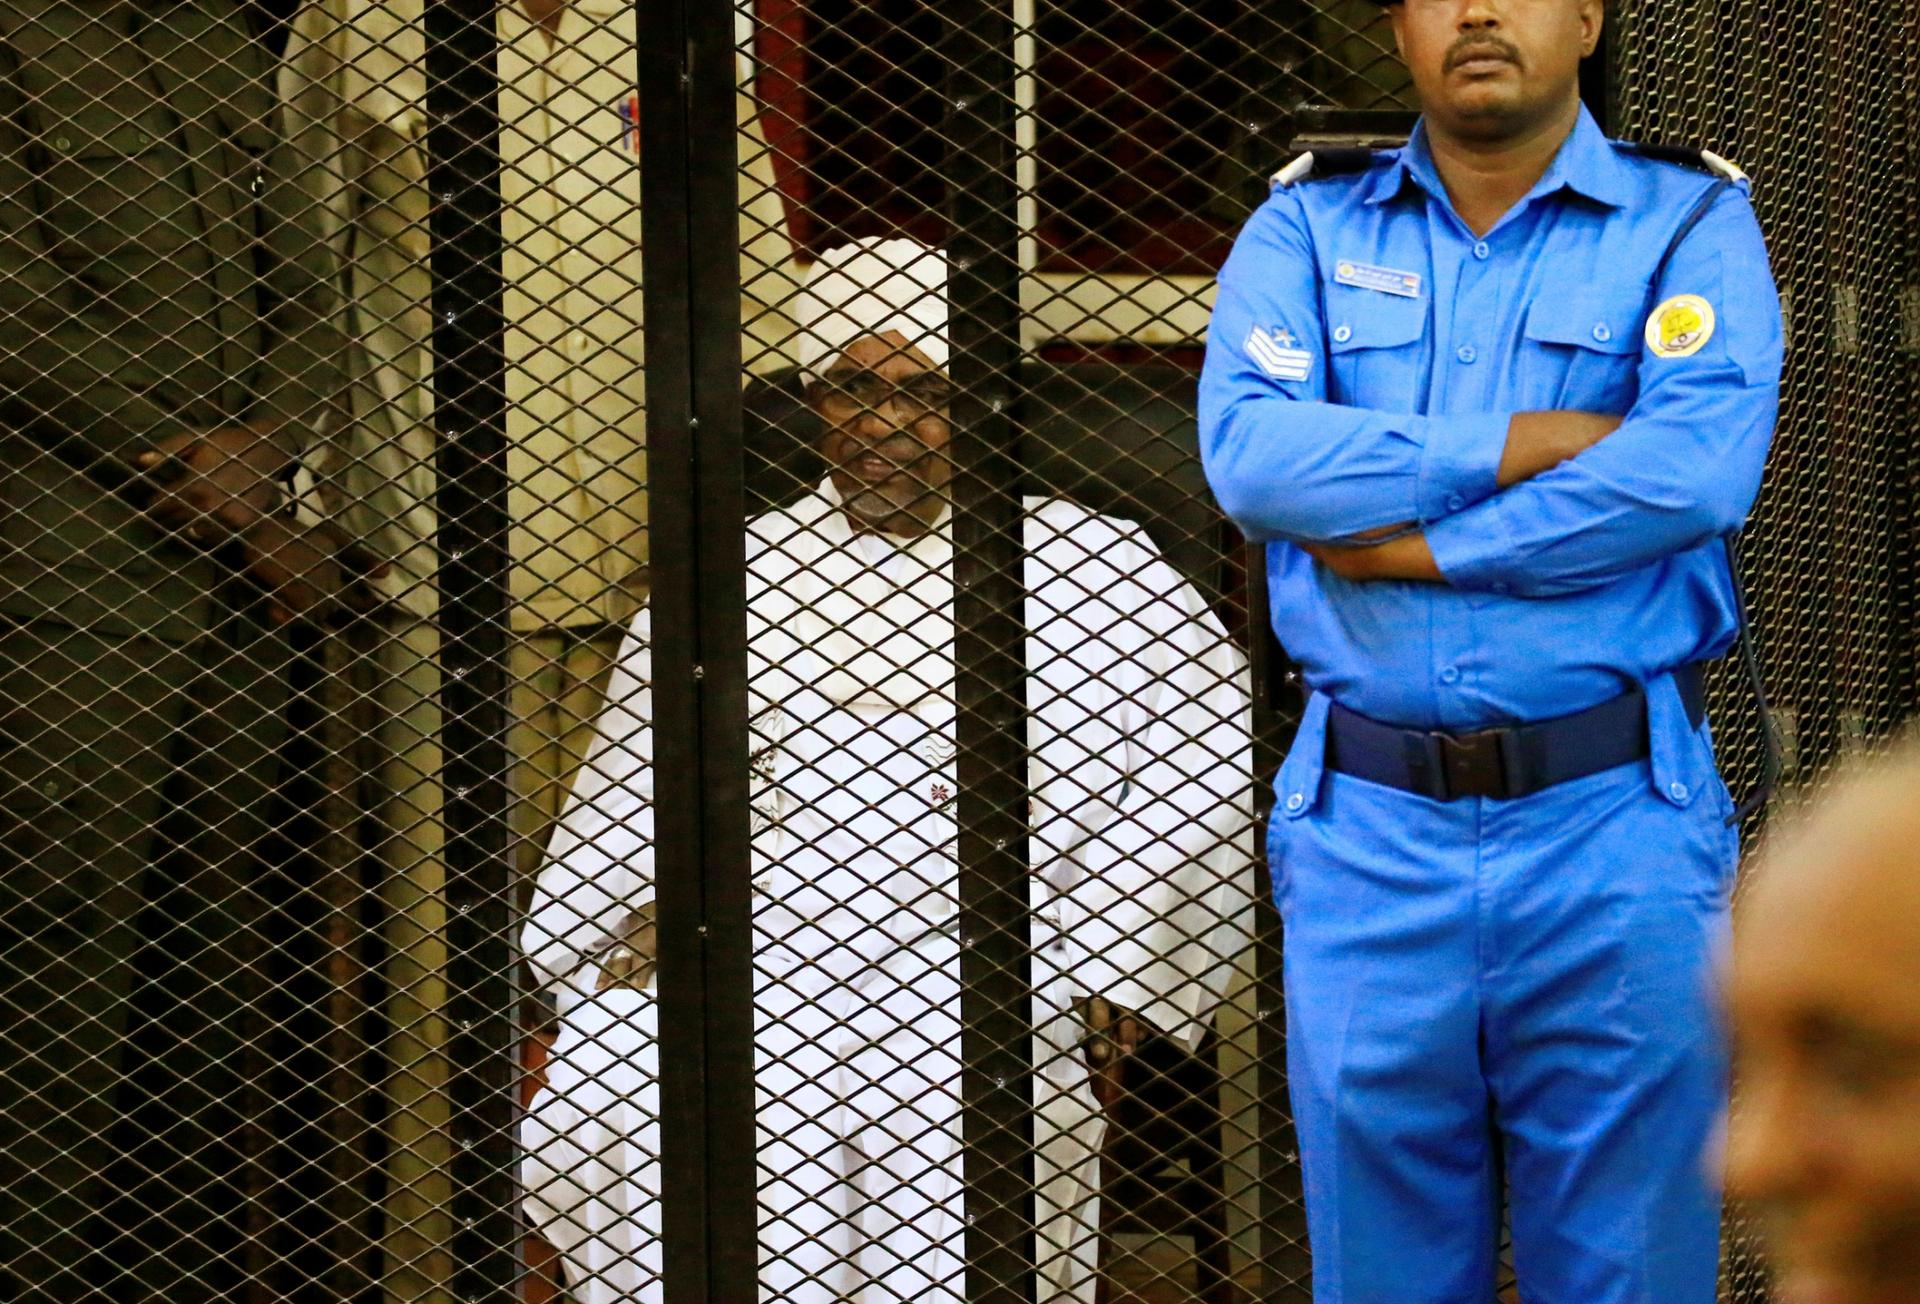 Sudanese former president Omar al-Bashir is shown sitting in all white and inside a metal cage with a guard standing beside it.